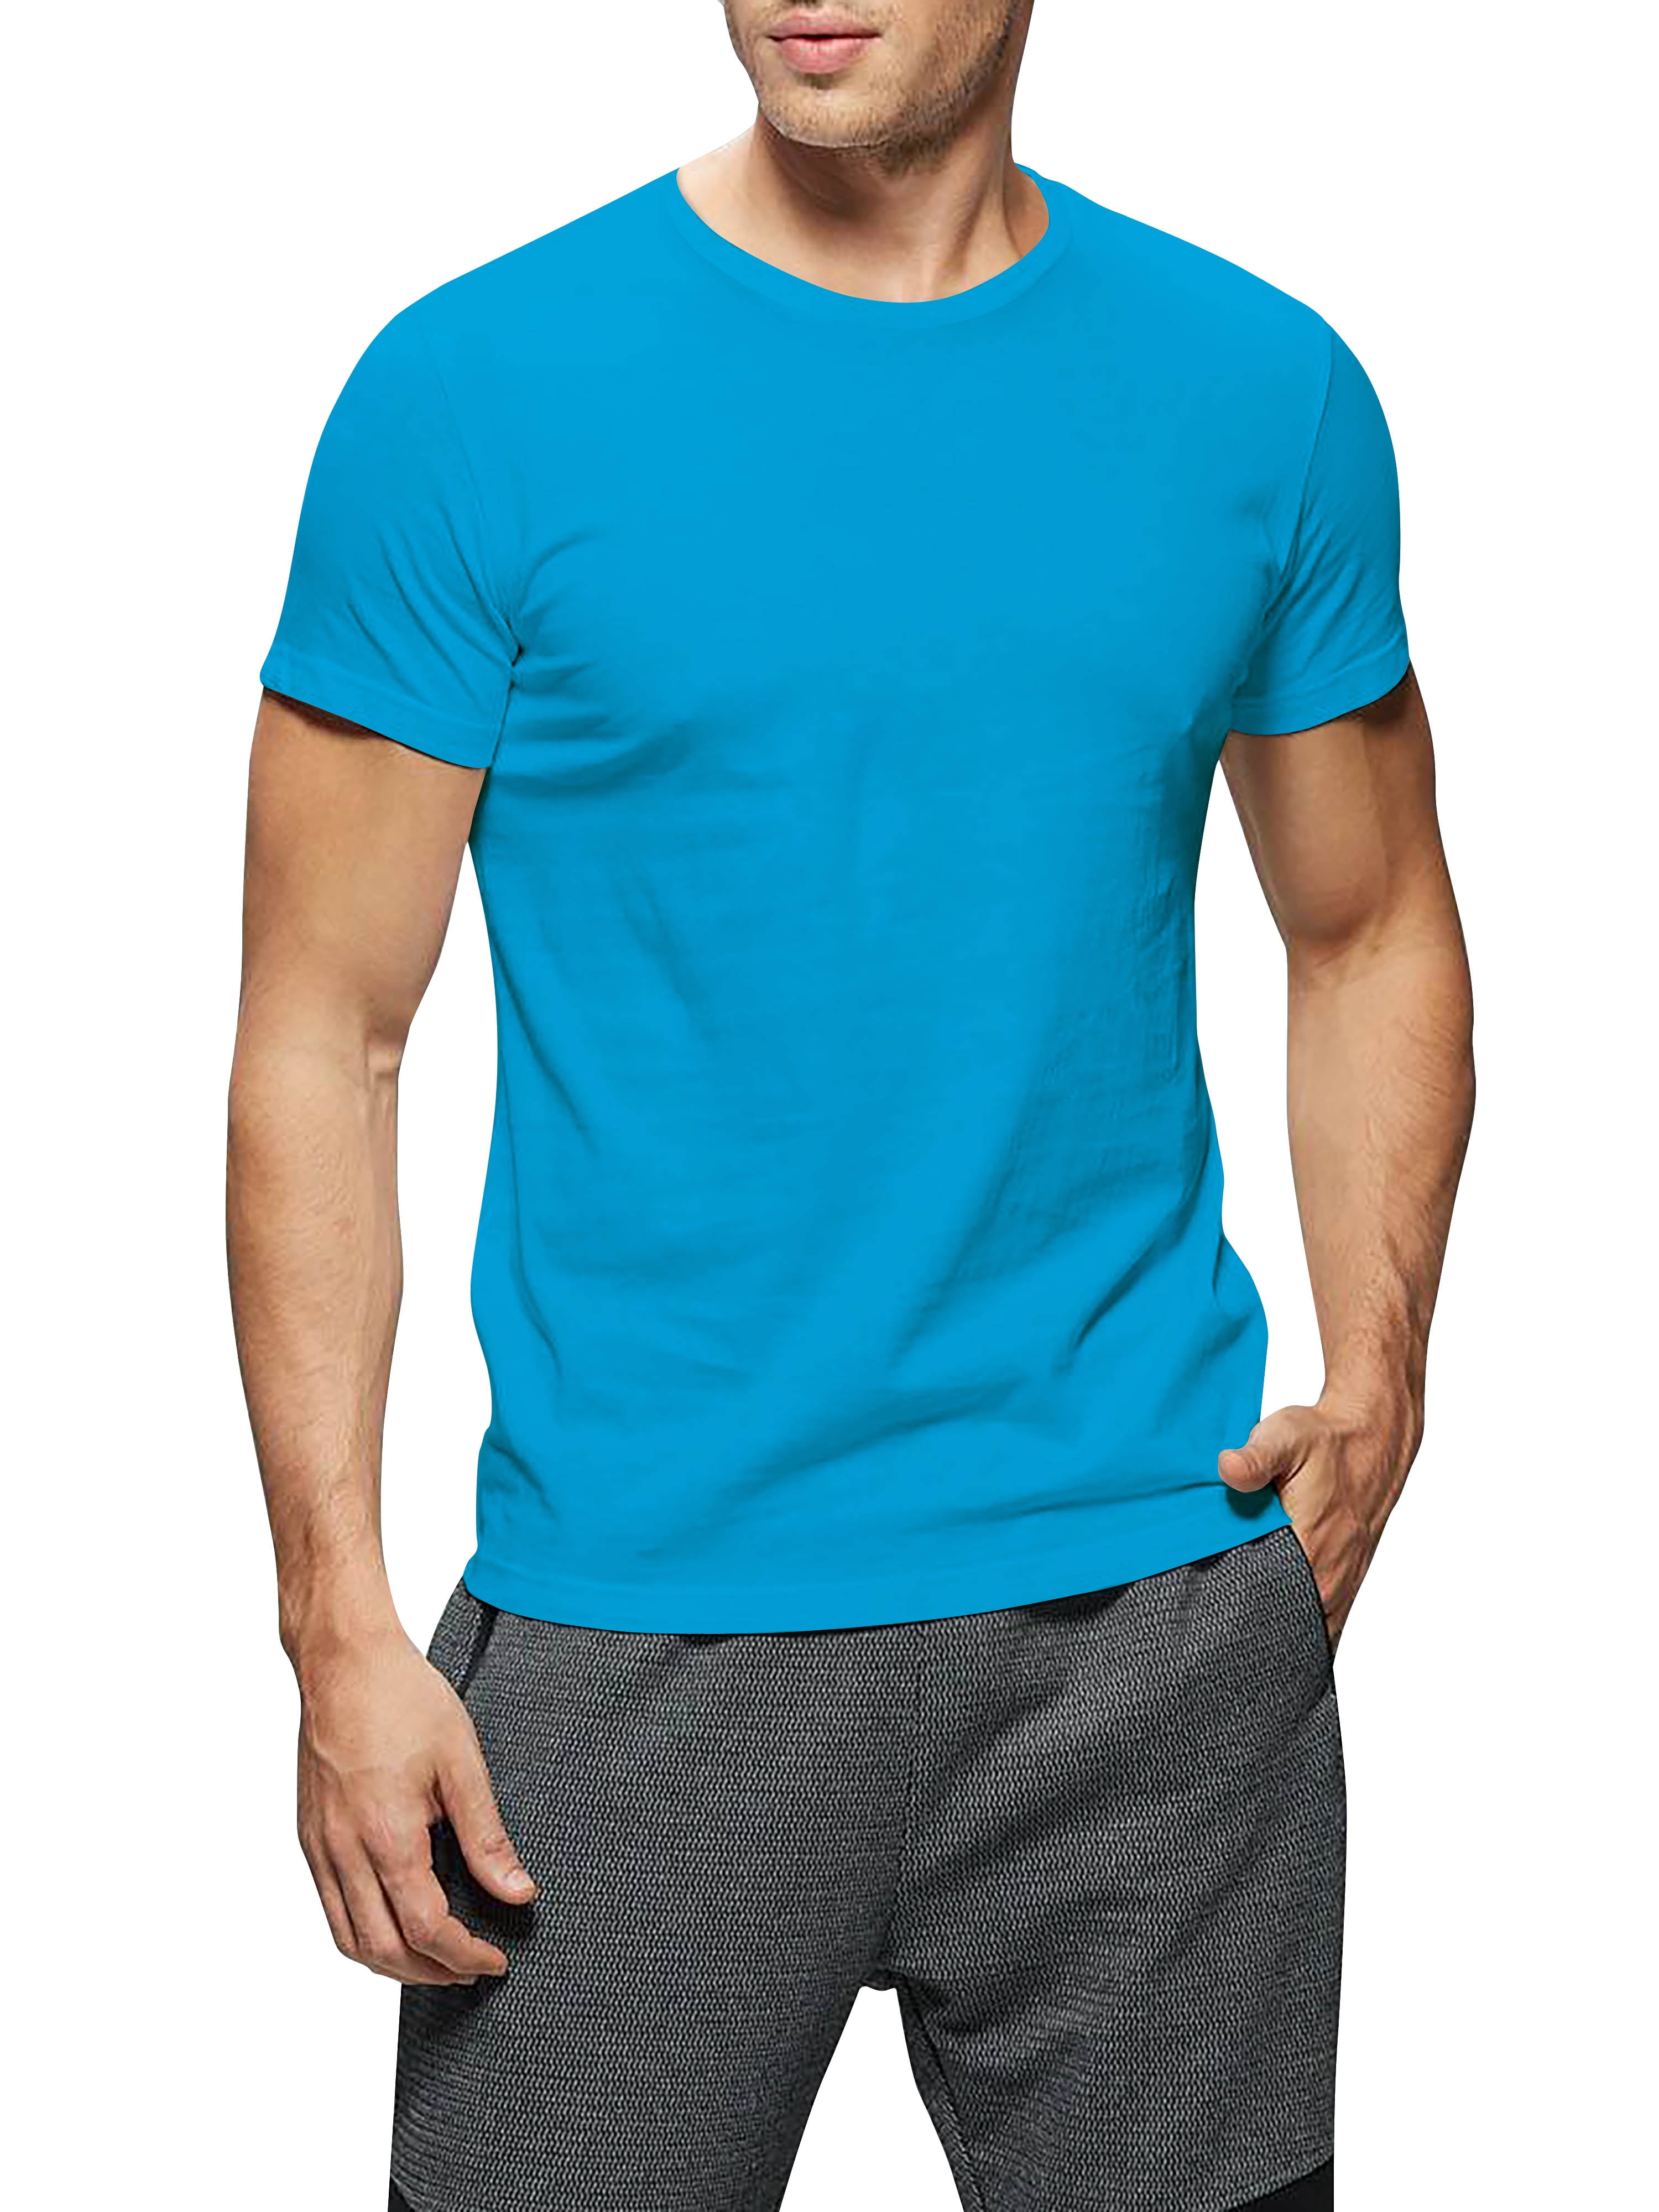 Ma Croix Men's Crew Neck T-Shirts Solid Short Sleeve Tee (Large ...